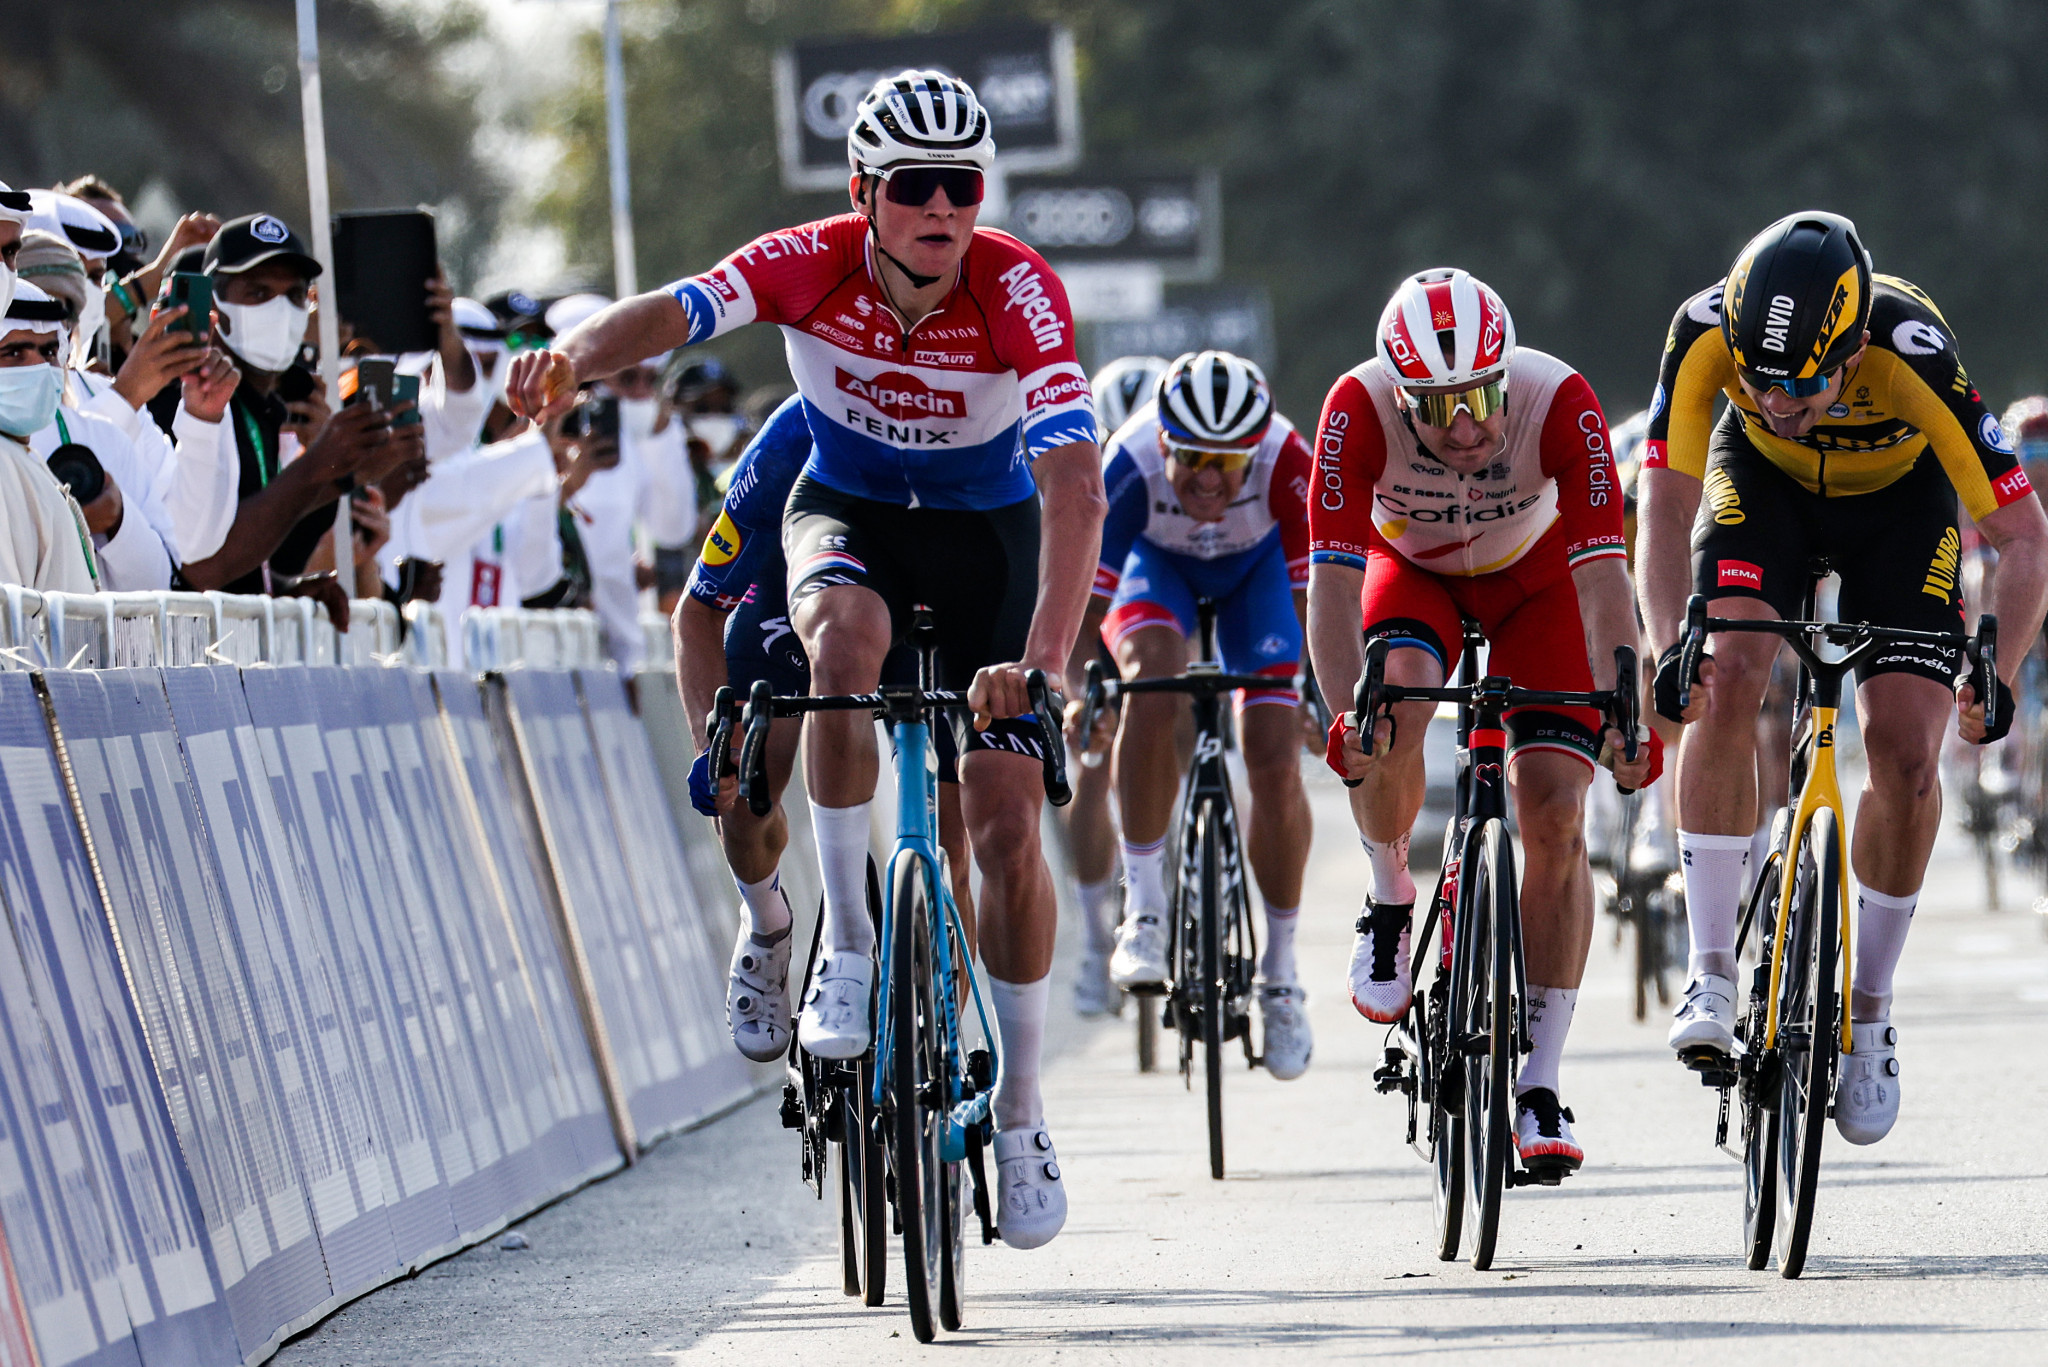 Mathieu Van der Poel came out on top in the sprint for the line to win the opening stage of the UAE Tour ©Getty Images